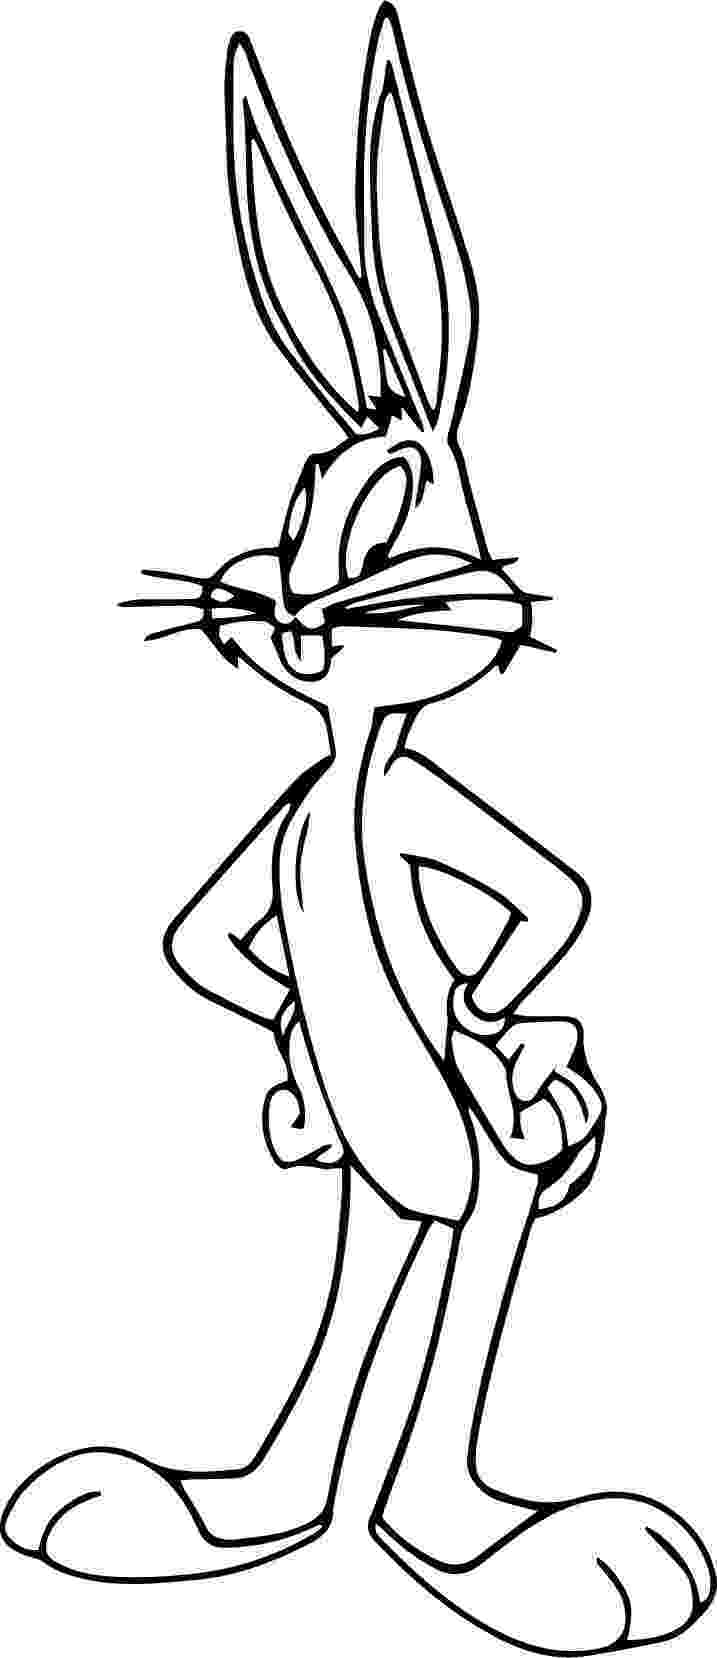 bugs bunny coloring pages bugs bunny coloring page wecoloringpagecom pages bugs coloring bunny 